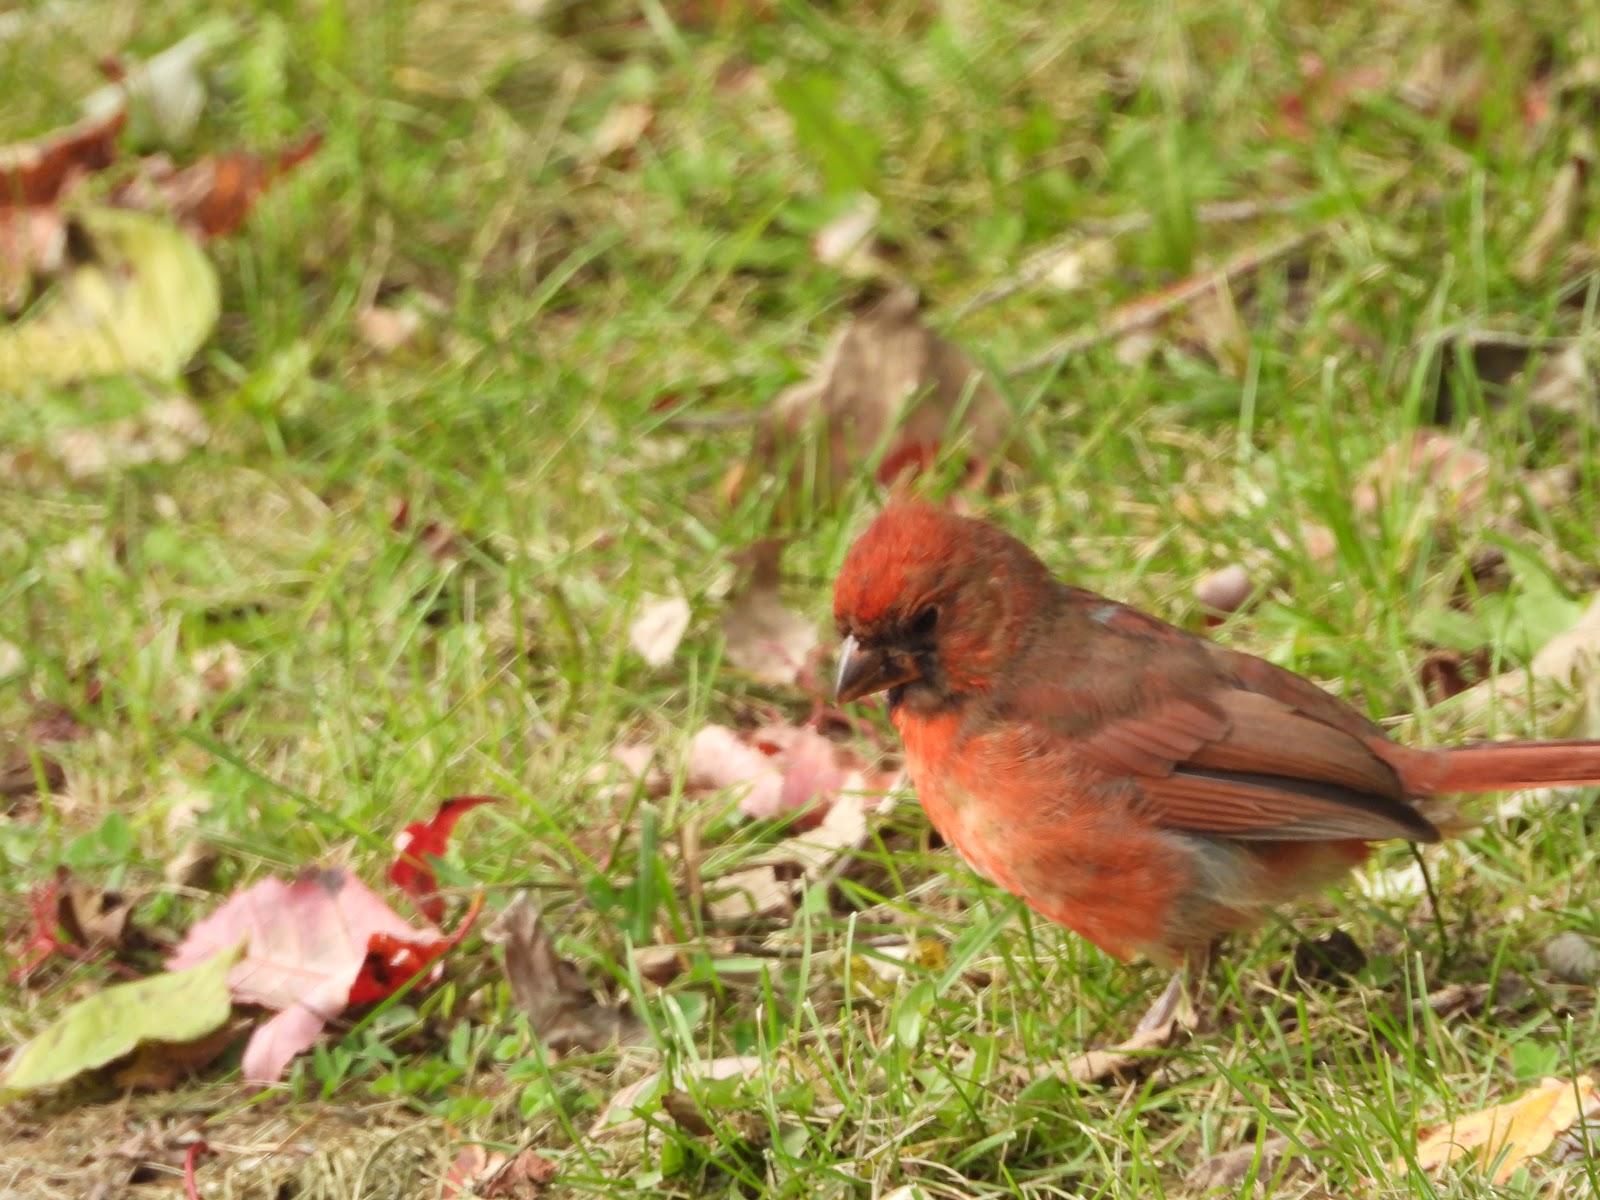 JUVENILE NORTHERN CARDINAL MOLTING TO ADULT, COLONEL